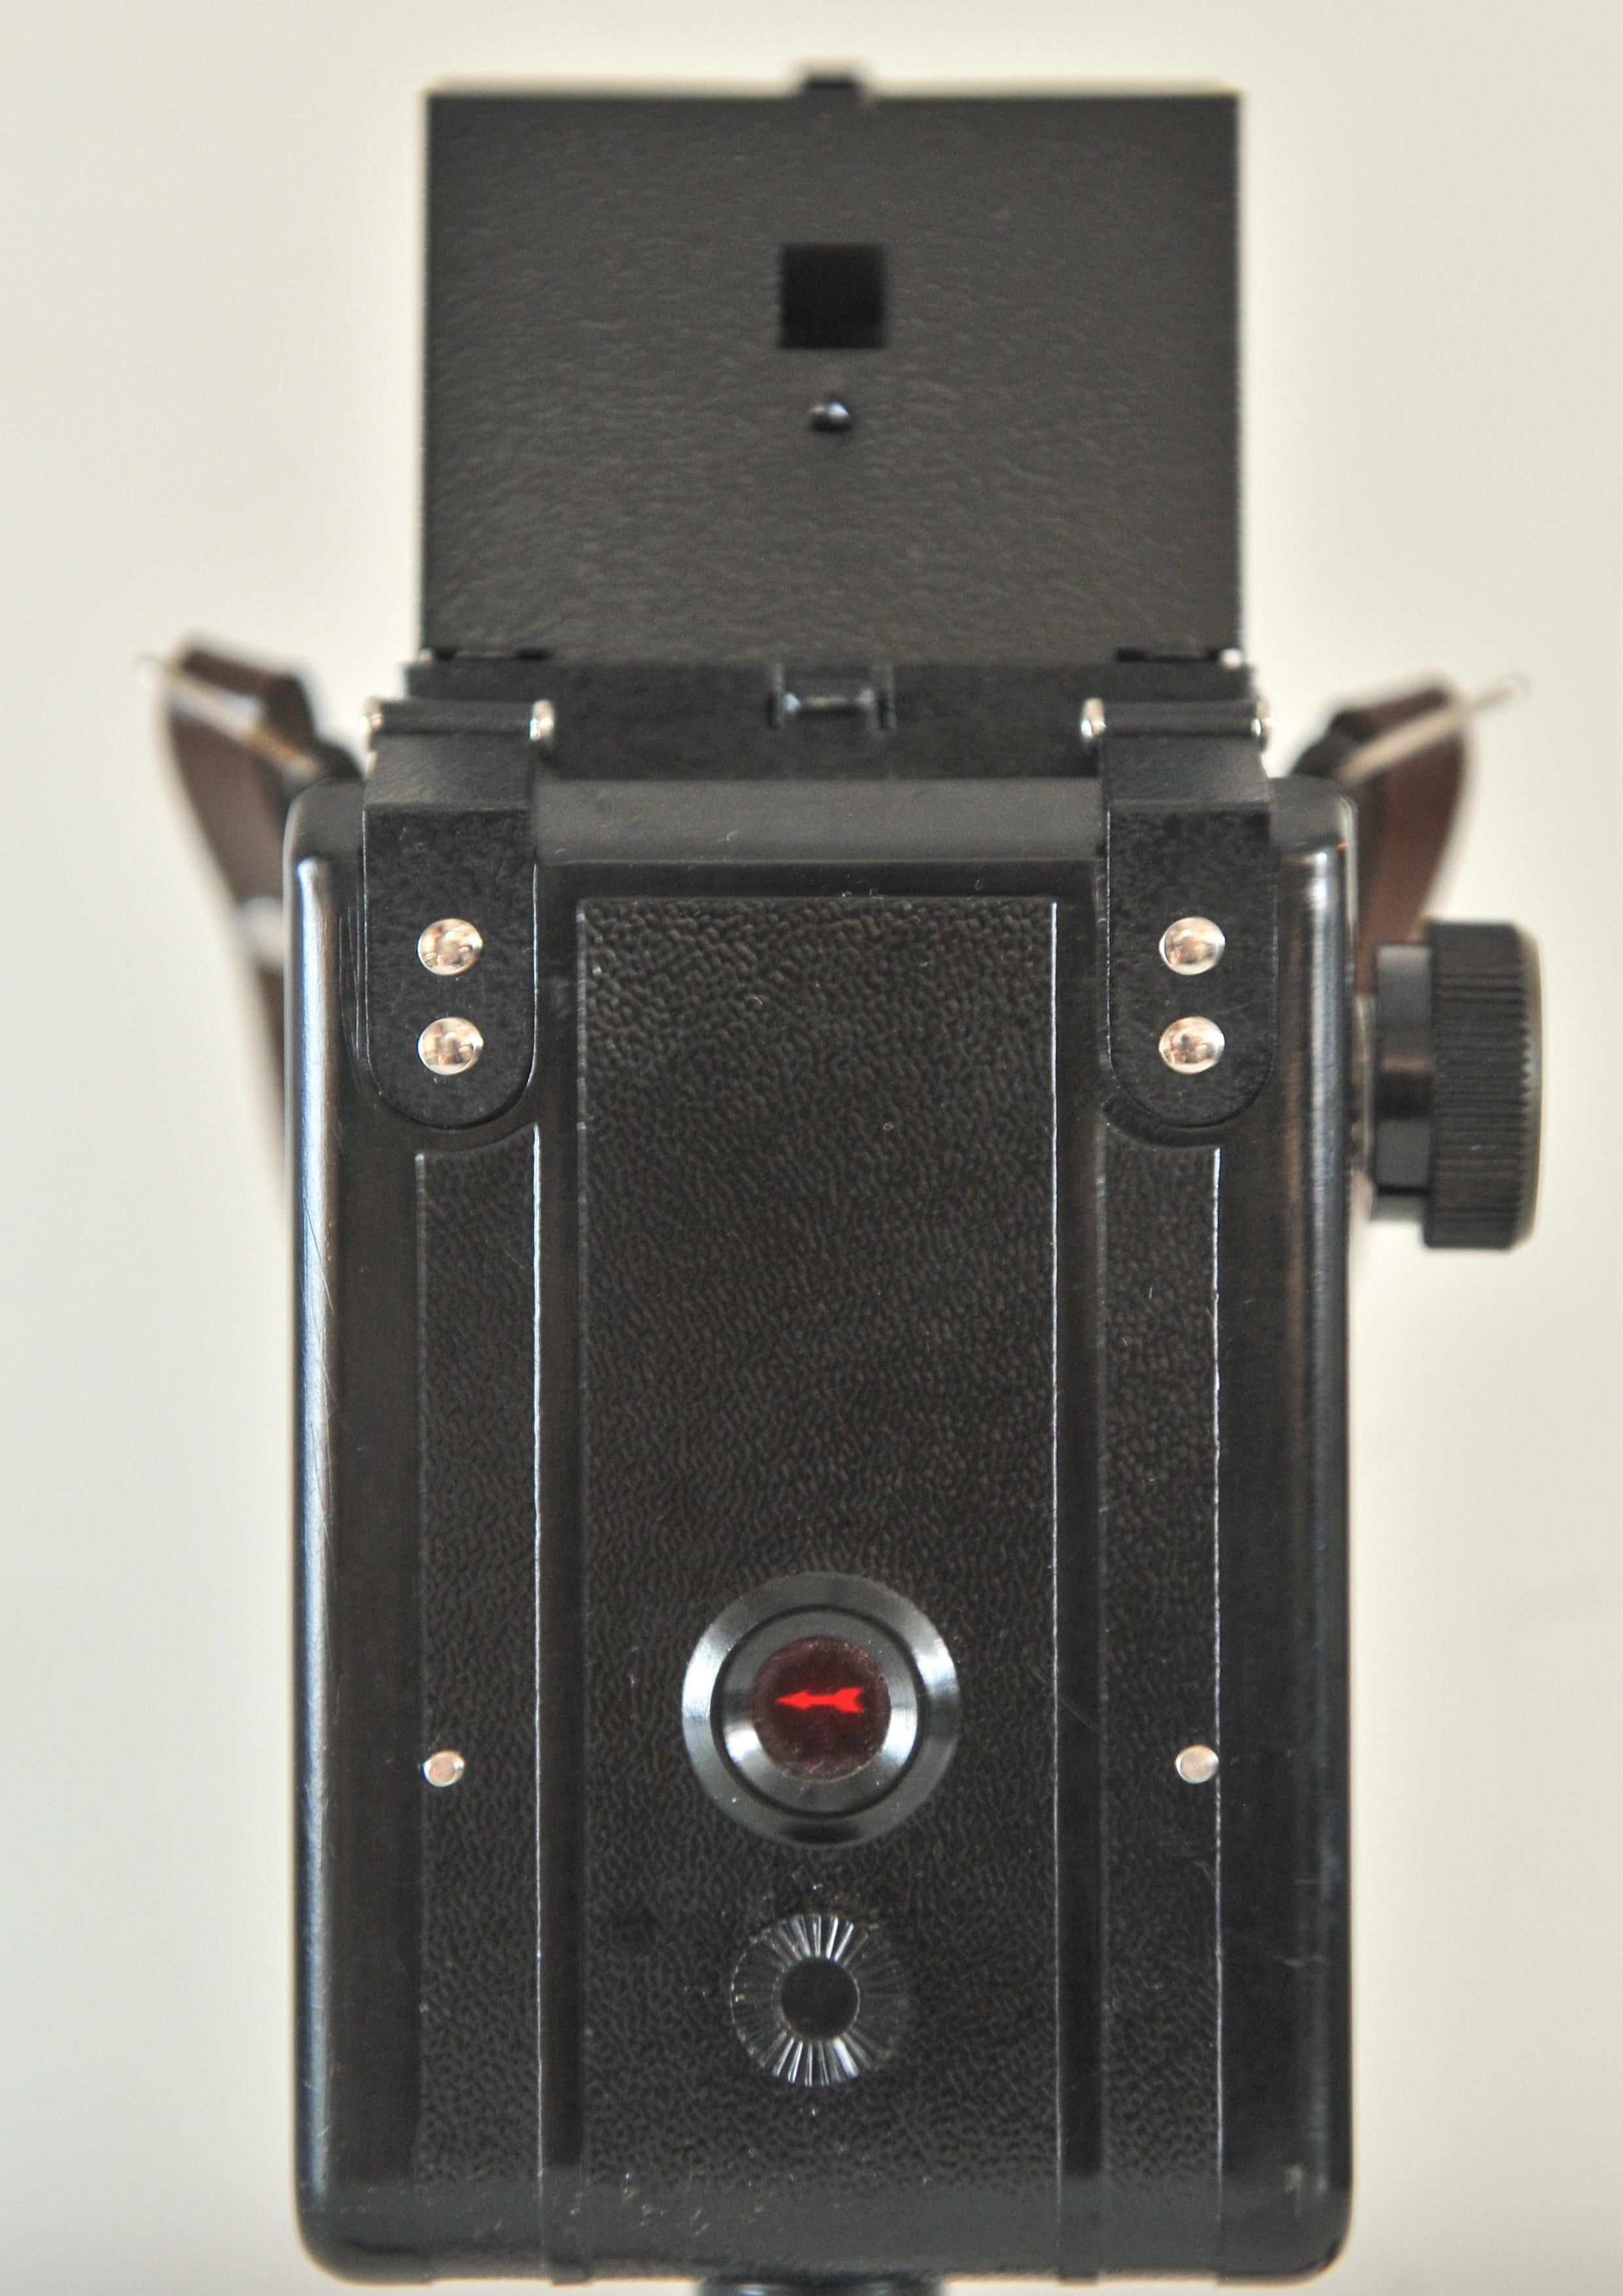 Russian Lubitel 2 Bakelite With LOMO T-22 75/4.5 Taking Lens Manufactured by OMO  For Sale